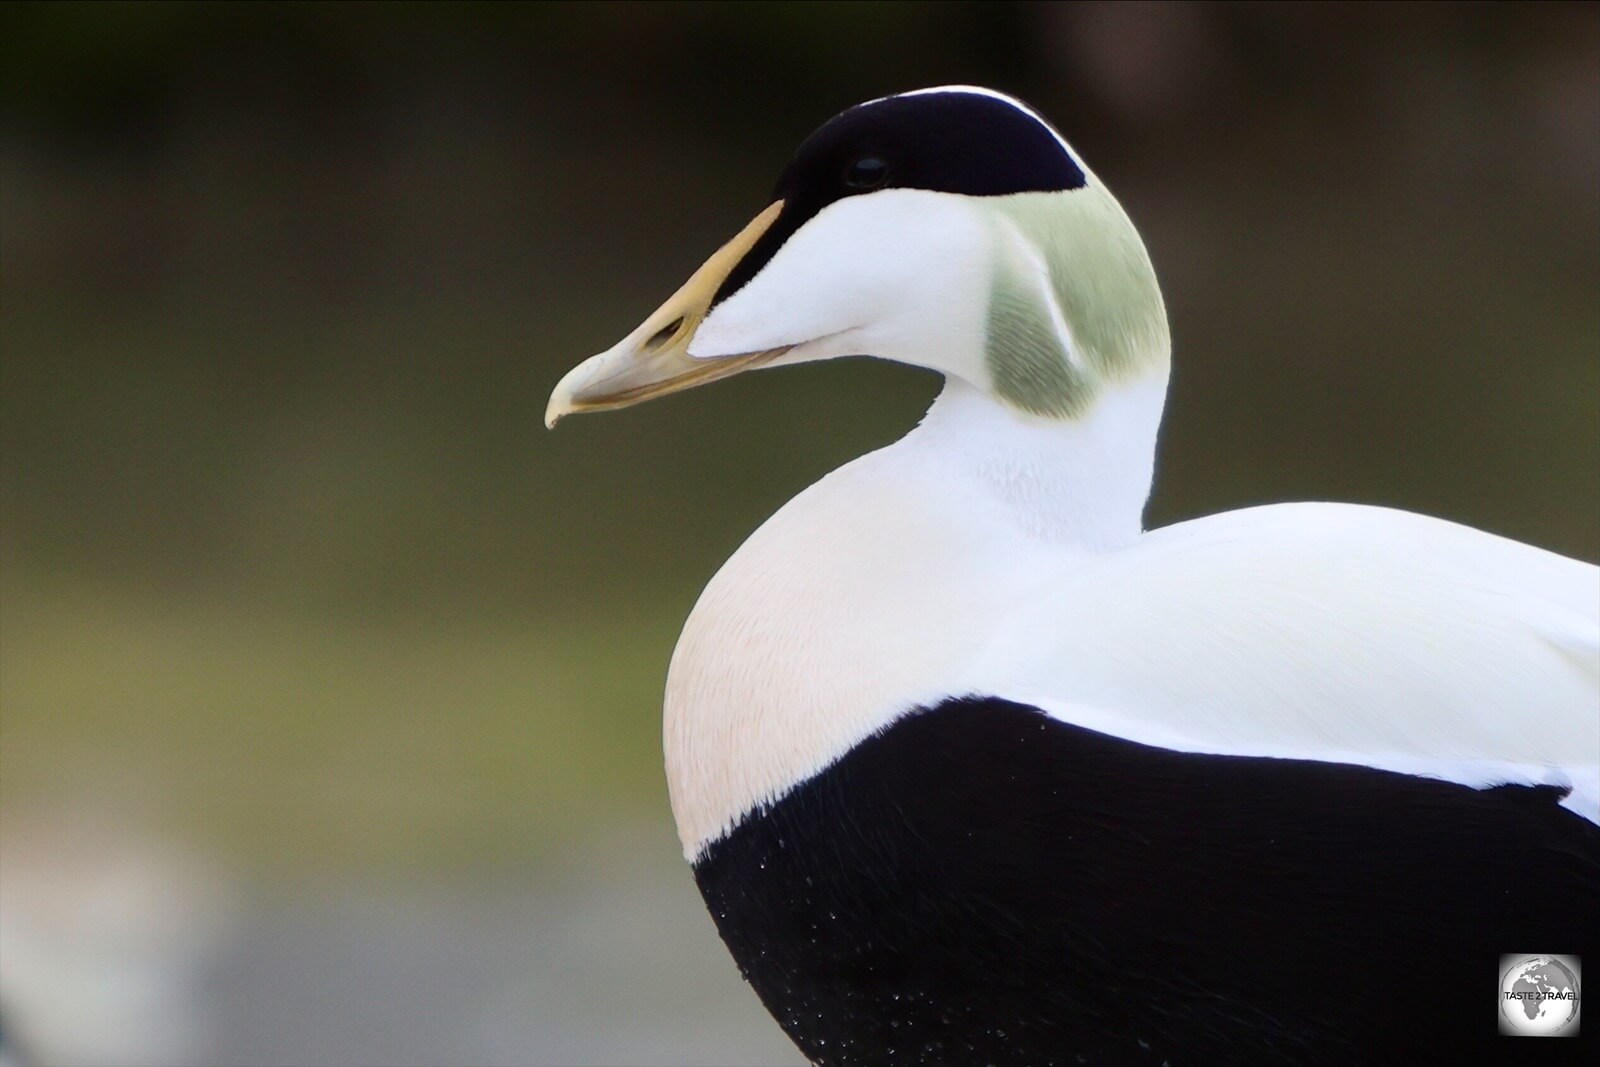 Common Eider ducks are famous for their soft, downy feathers which are commercially harvested in some parts of the Arctic.